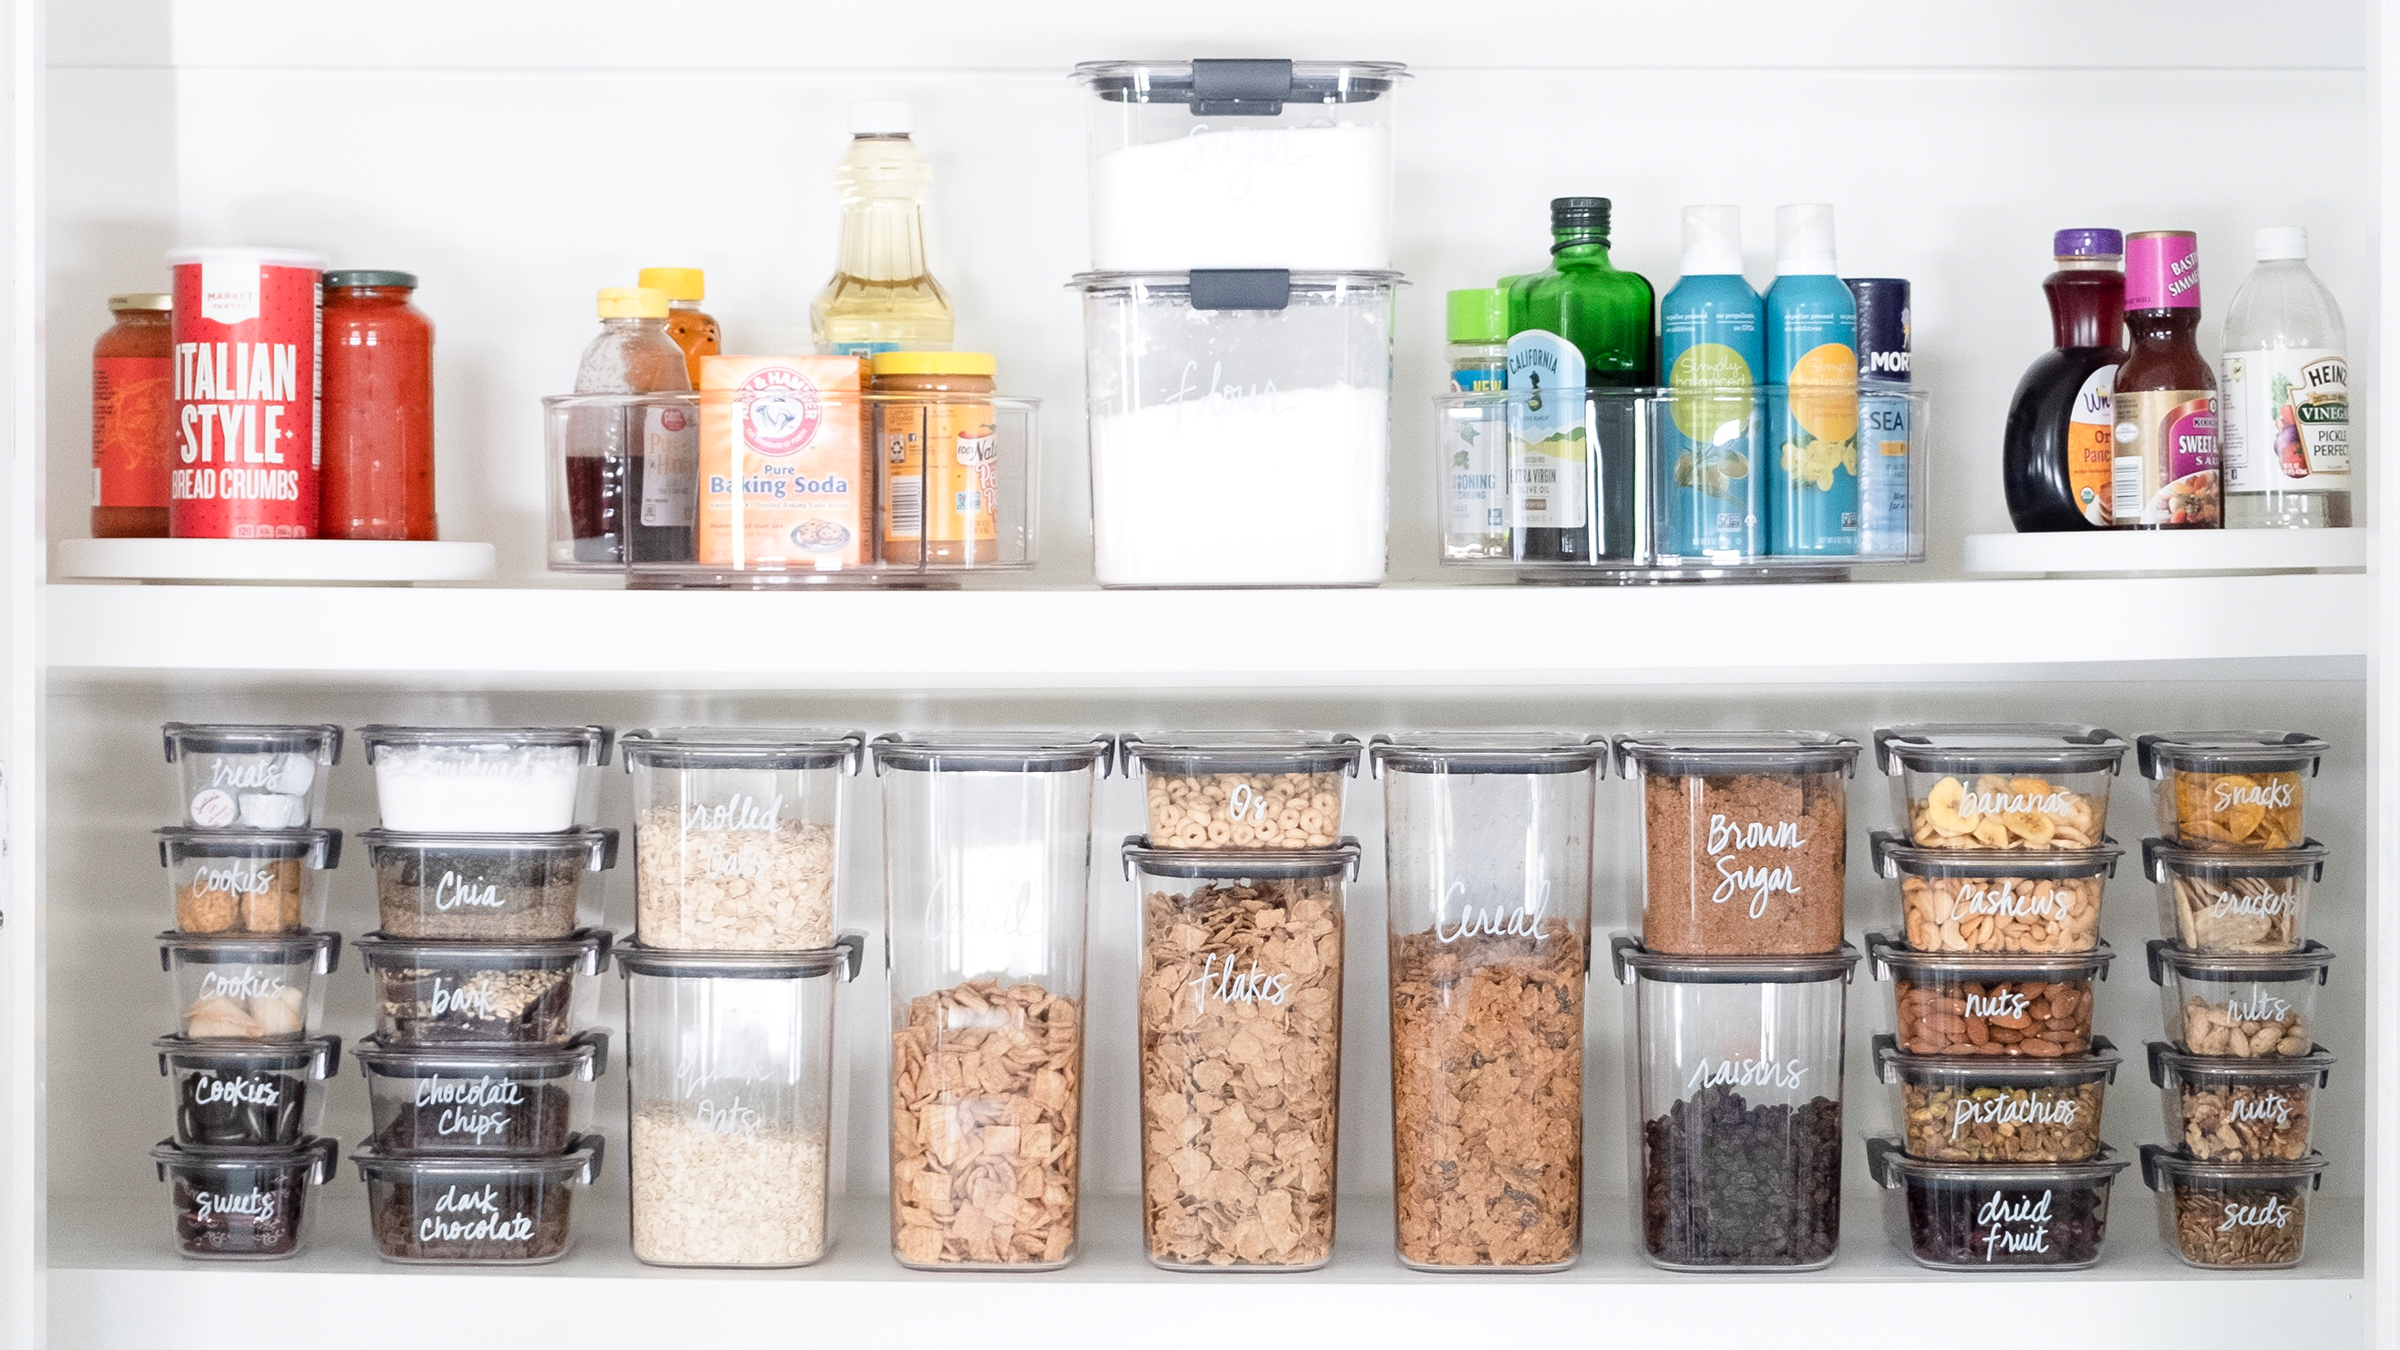 See How a Pro Organizer Gave This Cluttered Pantry New Life